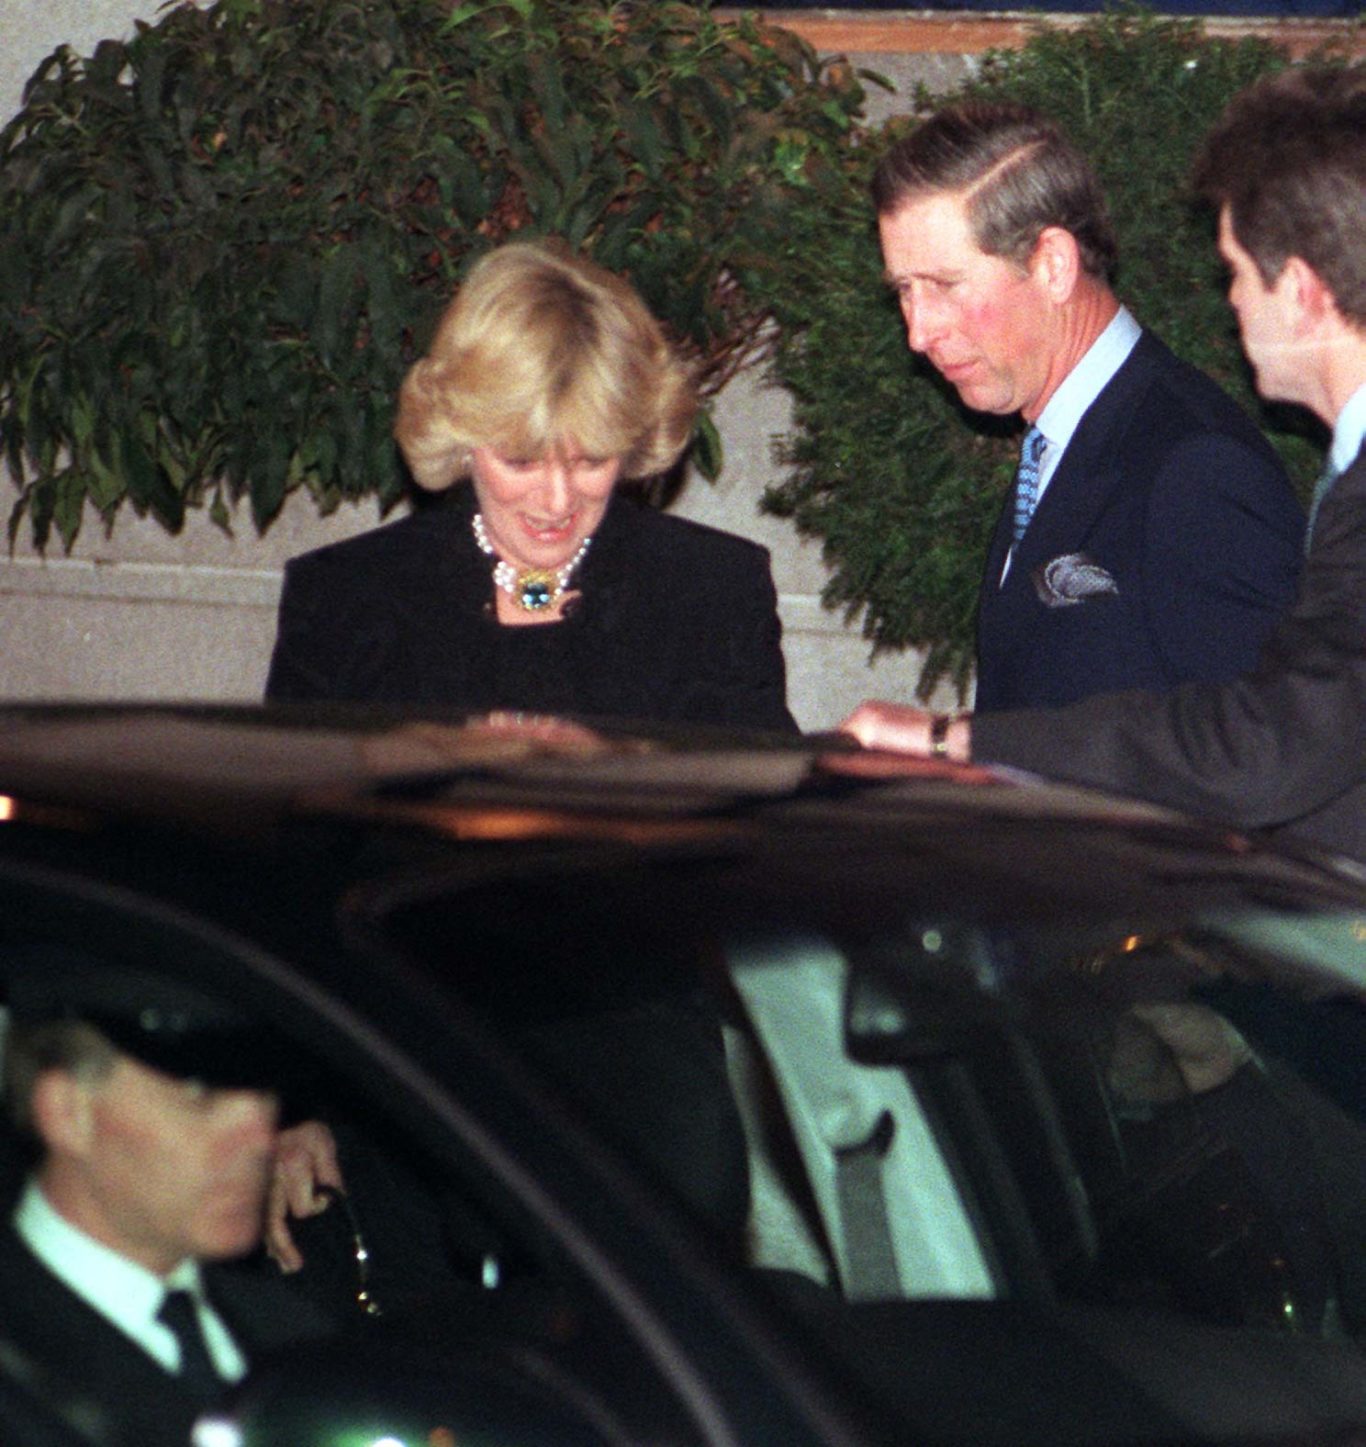 20 years on from Operation Ritz, Charles and Camilla’s public debut as ...